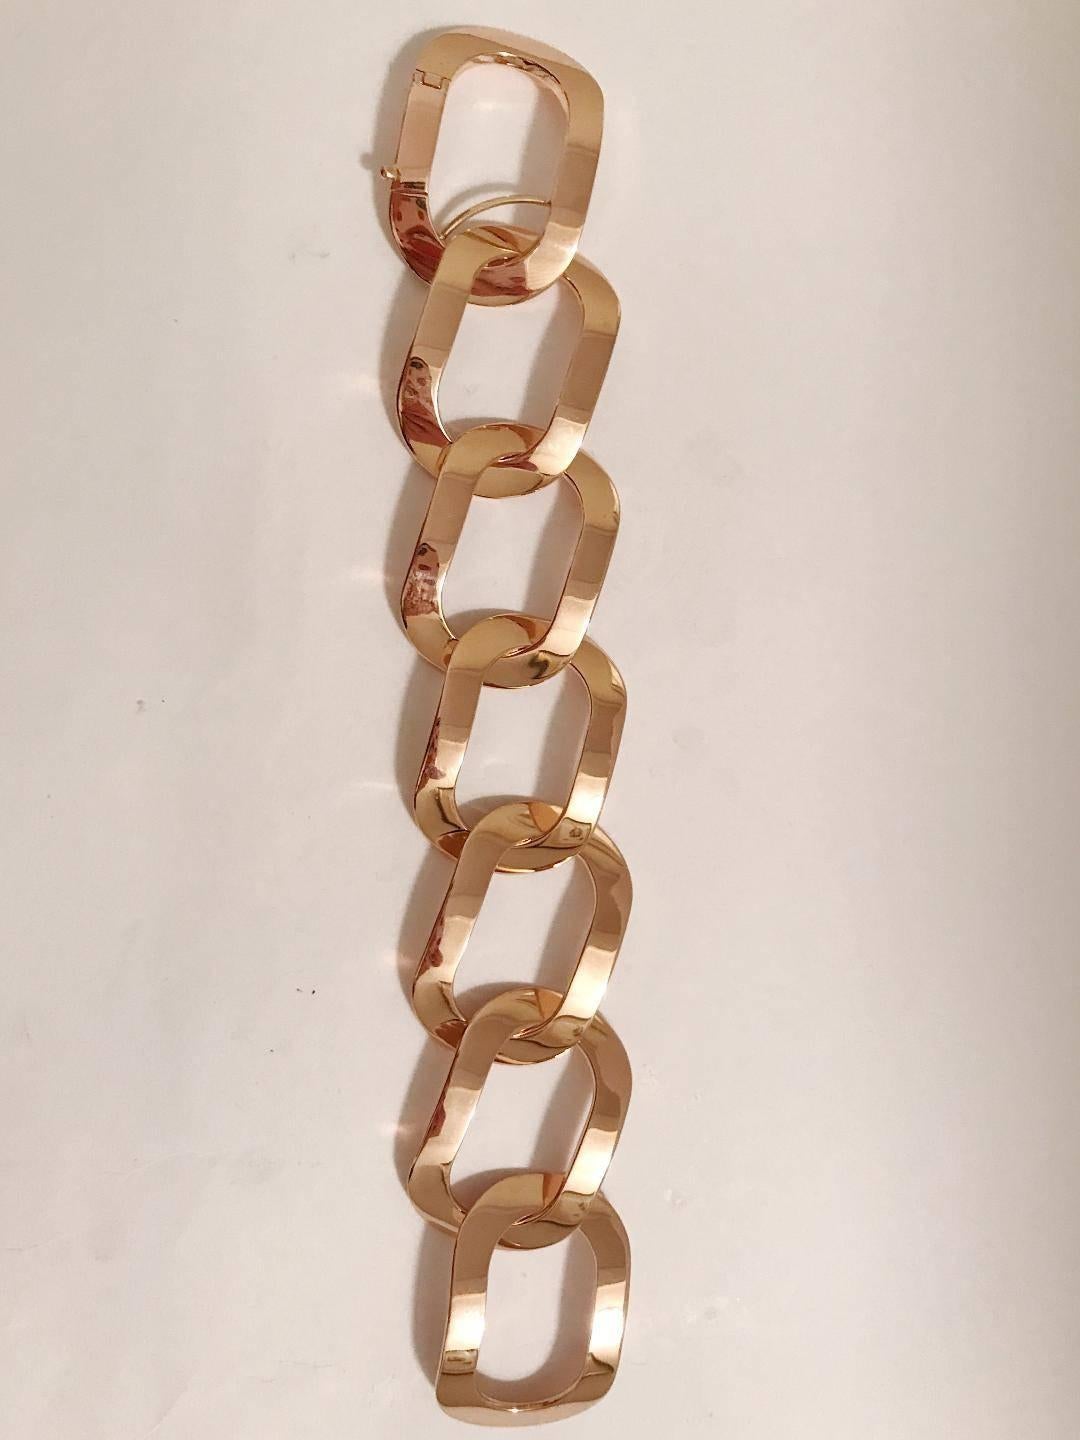 18kt Rose Gold Oval Link Bracelet with hinge clasp.

This bracelet can be made with any color gold and can be sized to any wrist. 

Please let me know if you have any questions

Best,
Christina